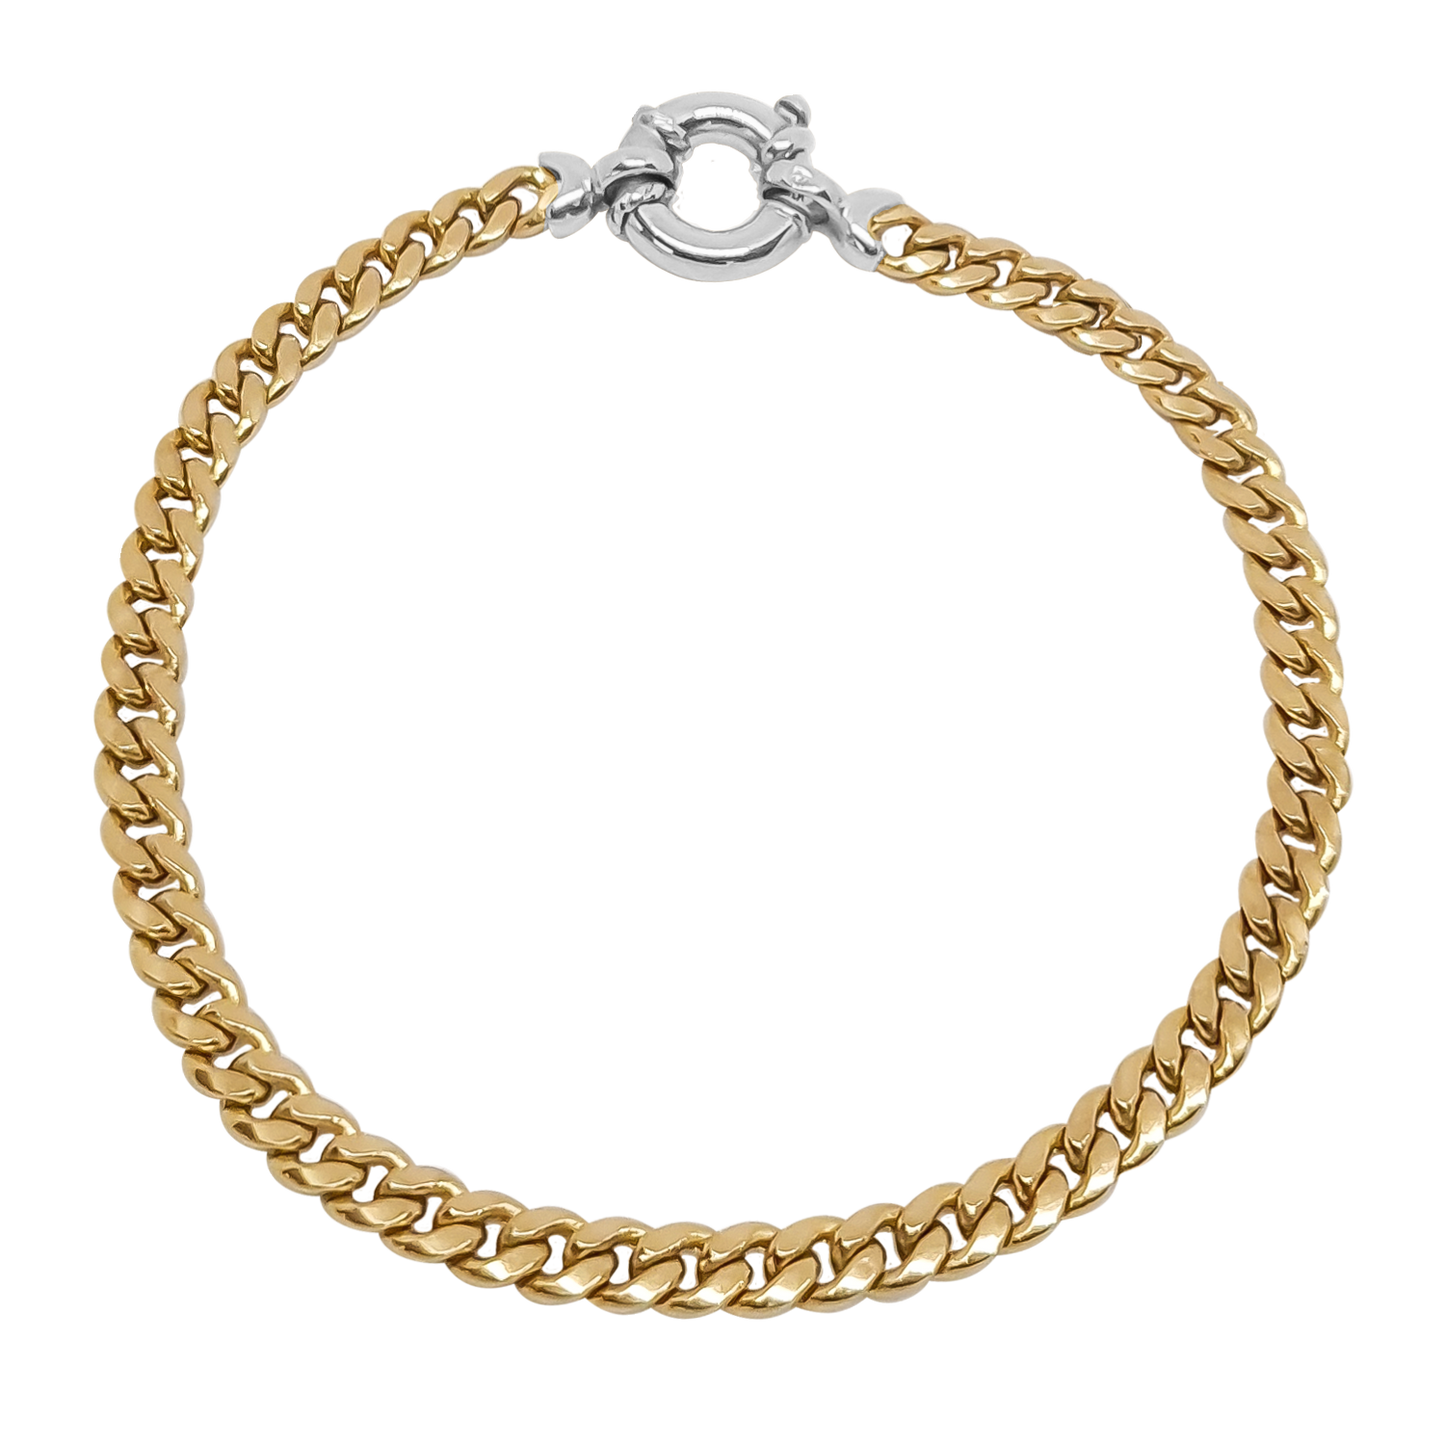 20cm Curb Link Bracelet in 9ct Two Tone Gold